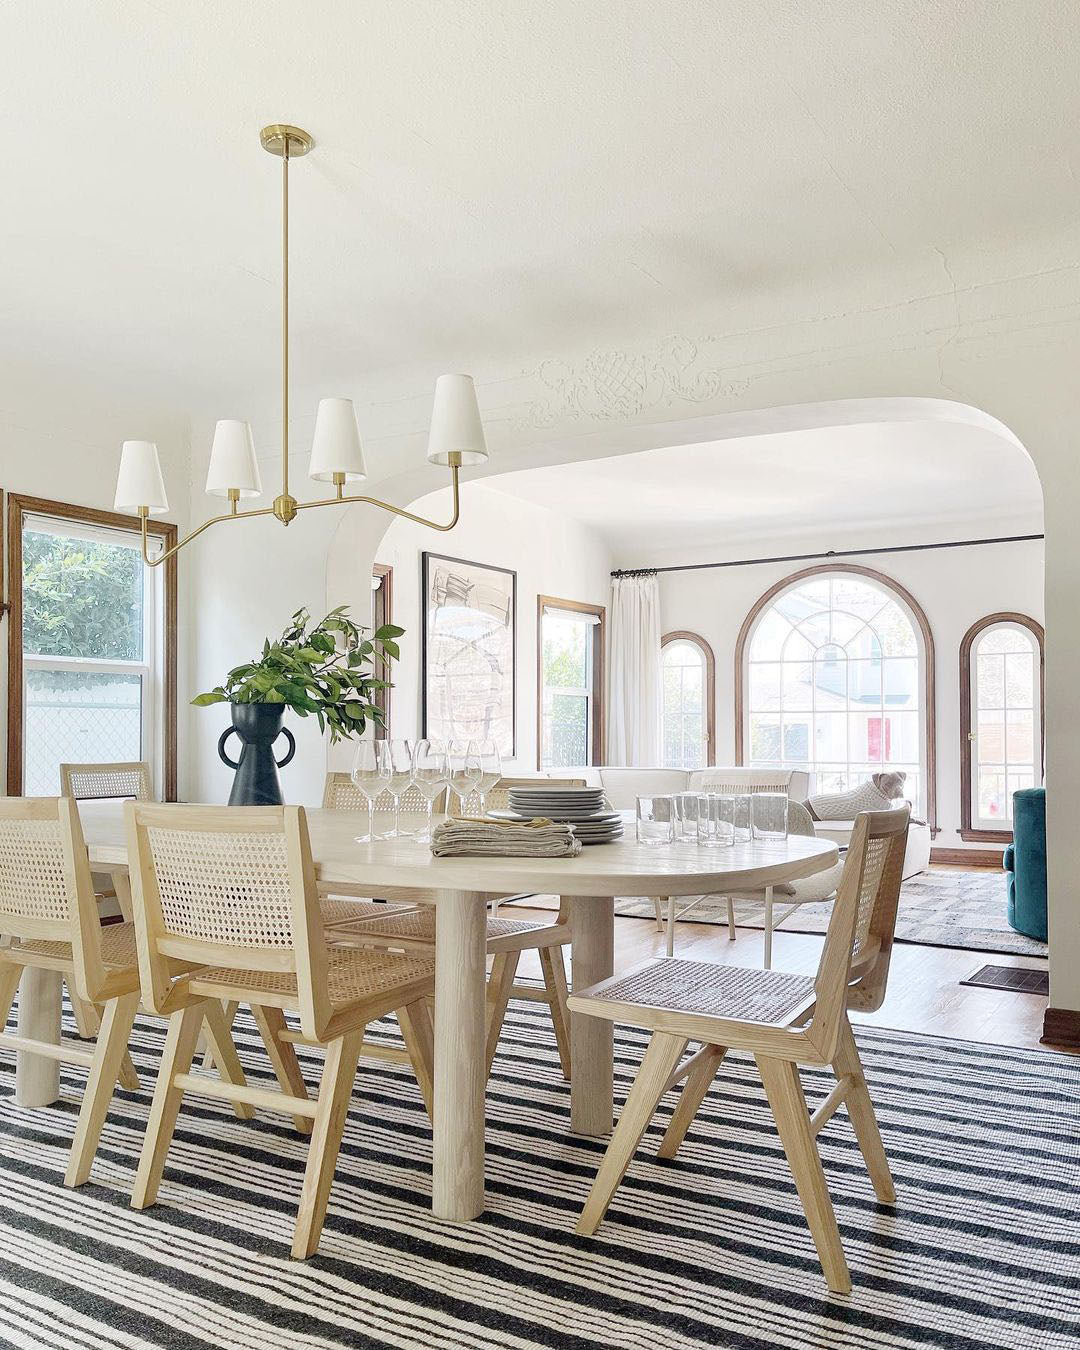 Before finding the best dining room color, this space felt less personal and inspiring.